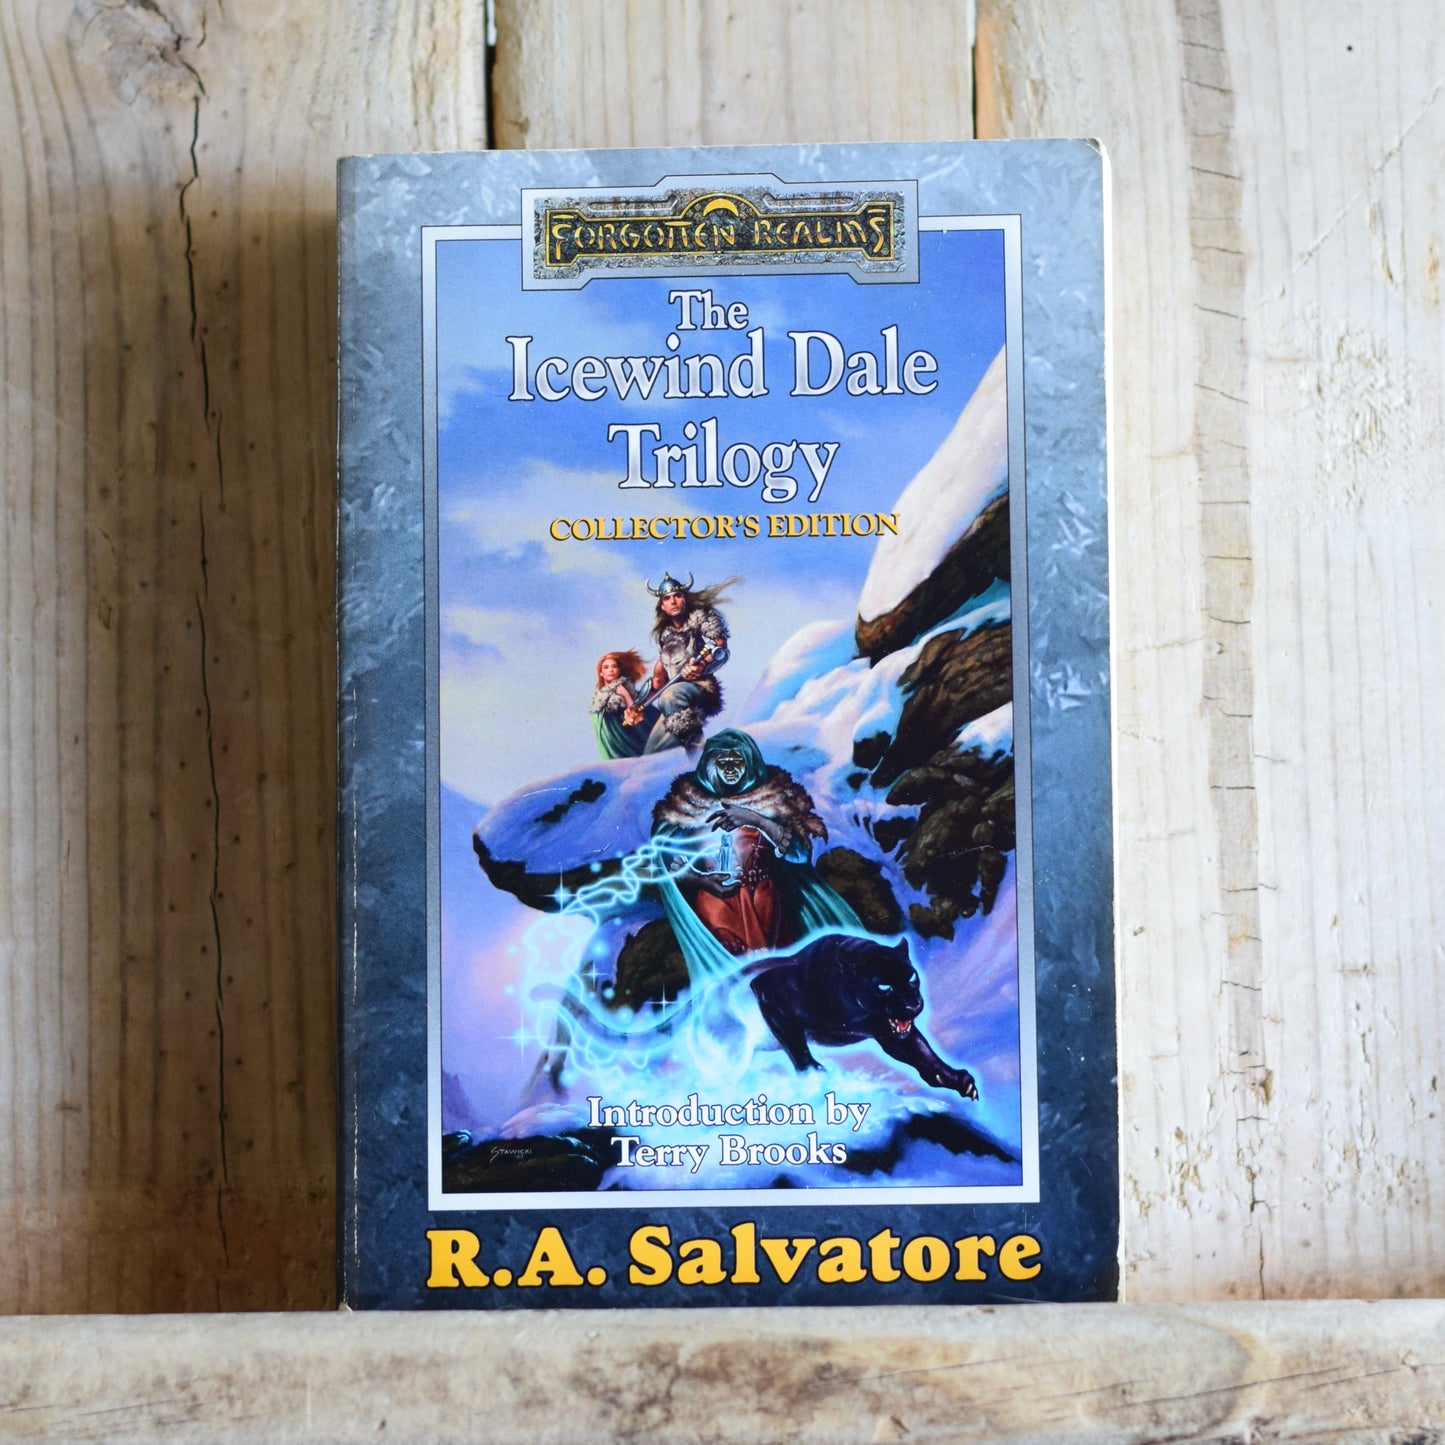 Dungeons and Dragons Paperback: R A Salvatore - The Icewind Dale Trilogy Collector's Edition